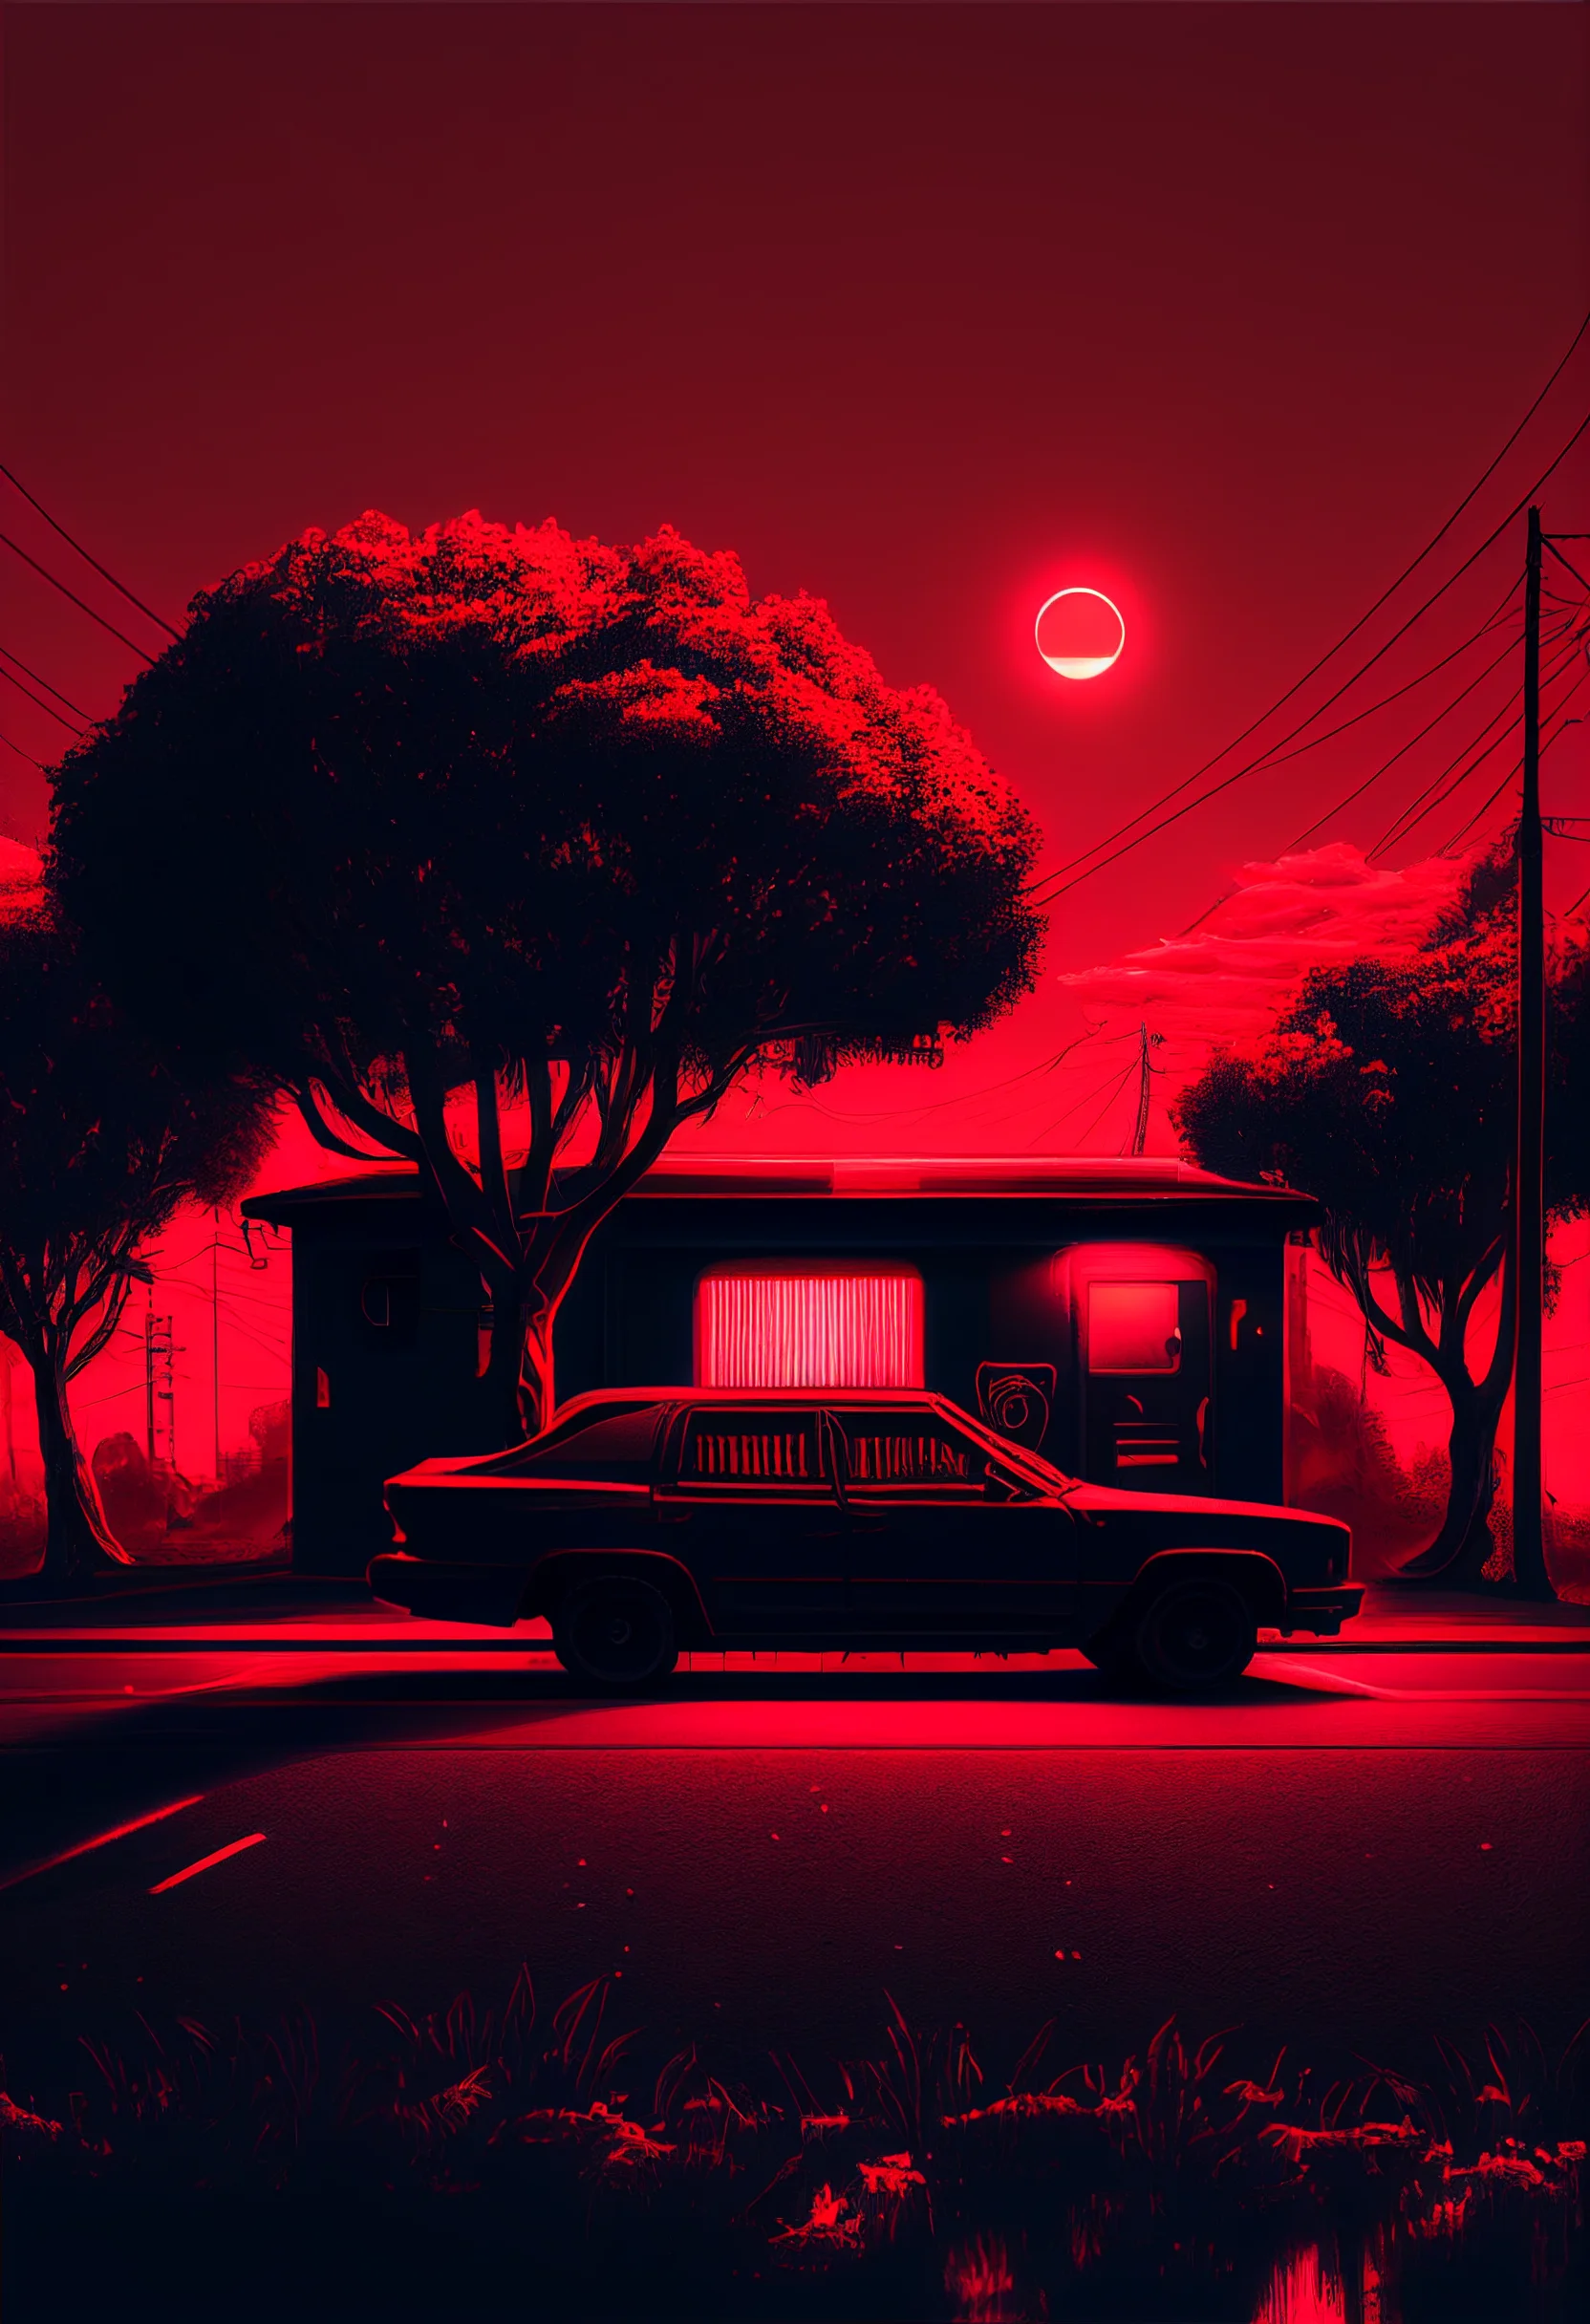 A red and black illustration of a hearse parked on a street - IPhone red